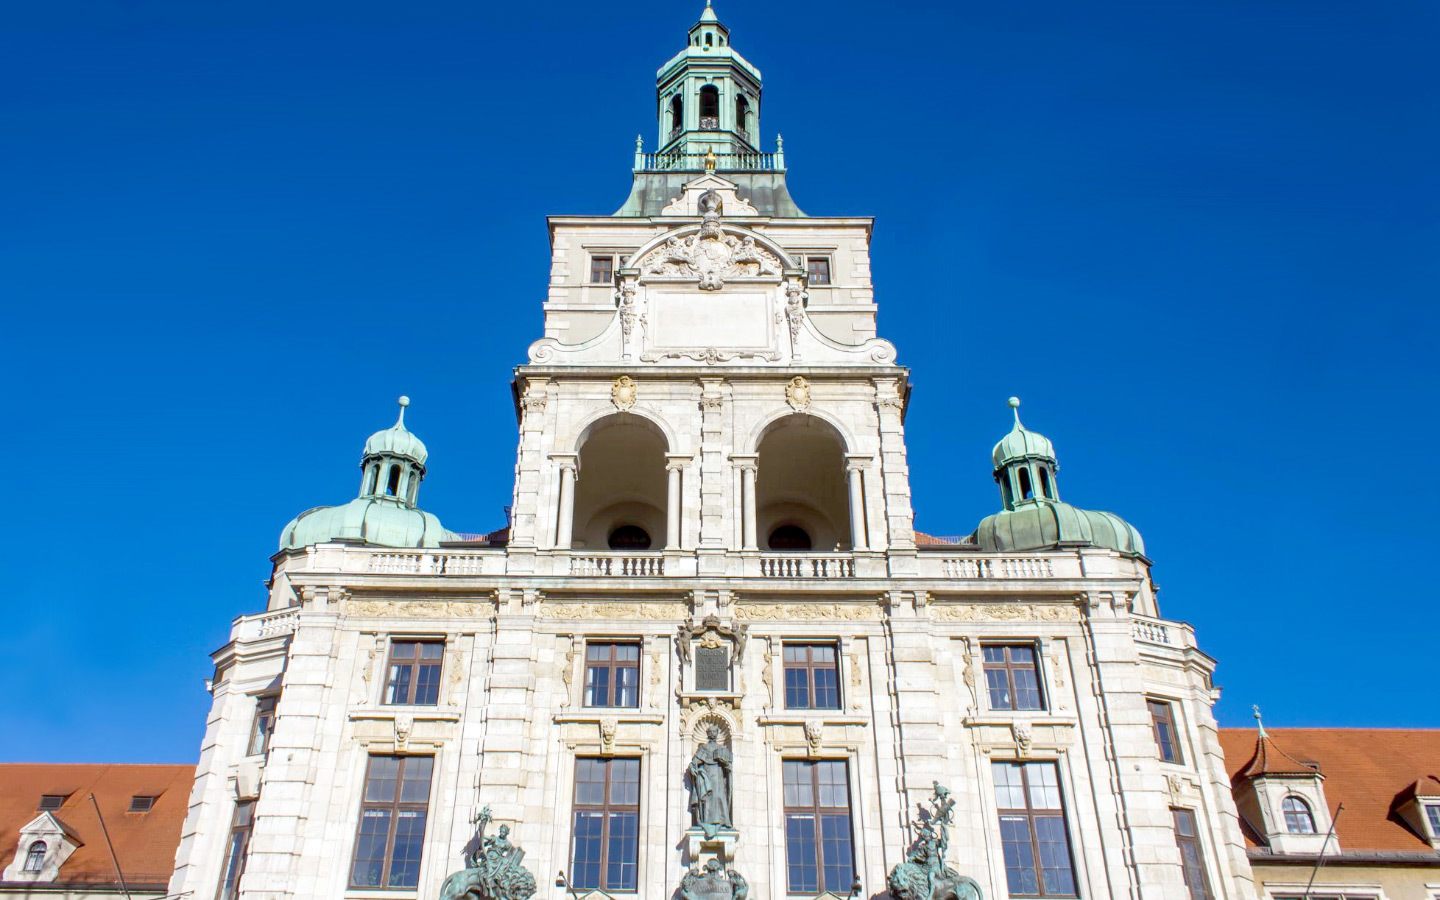 The exterior of the Bavarian National Museum in Munich on a budget